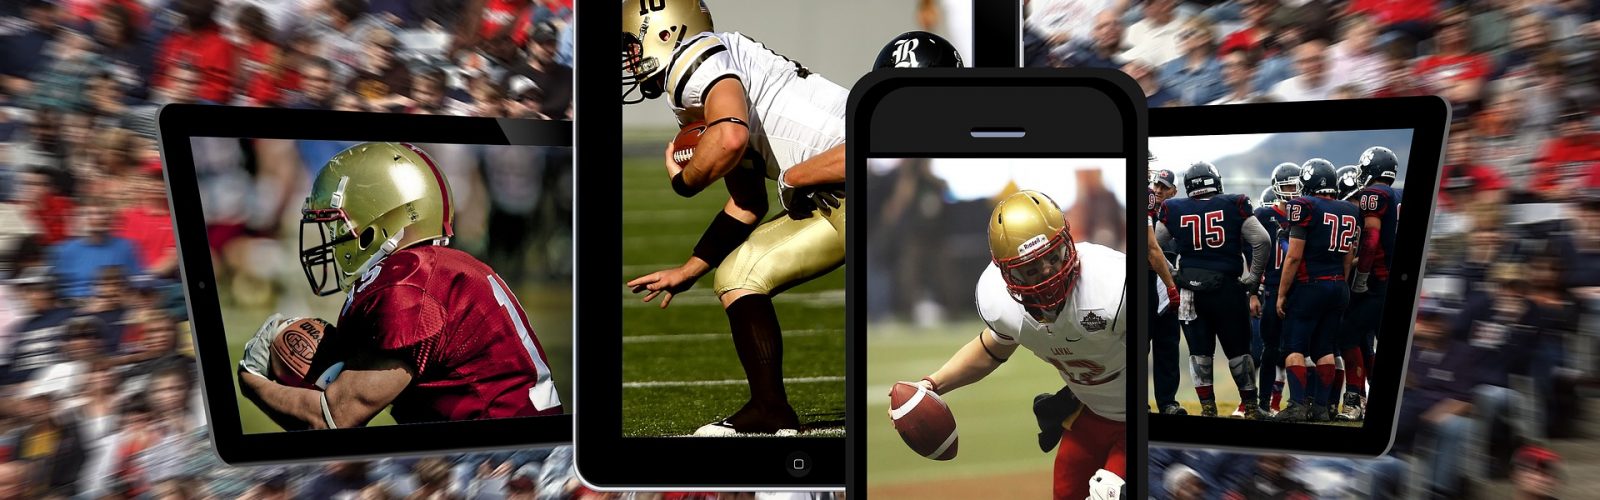 Smartphones and tablets displaying images of football players superimposed on a blurred background image of a crowd at a sporting event